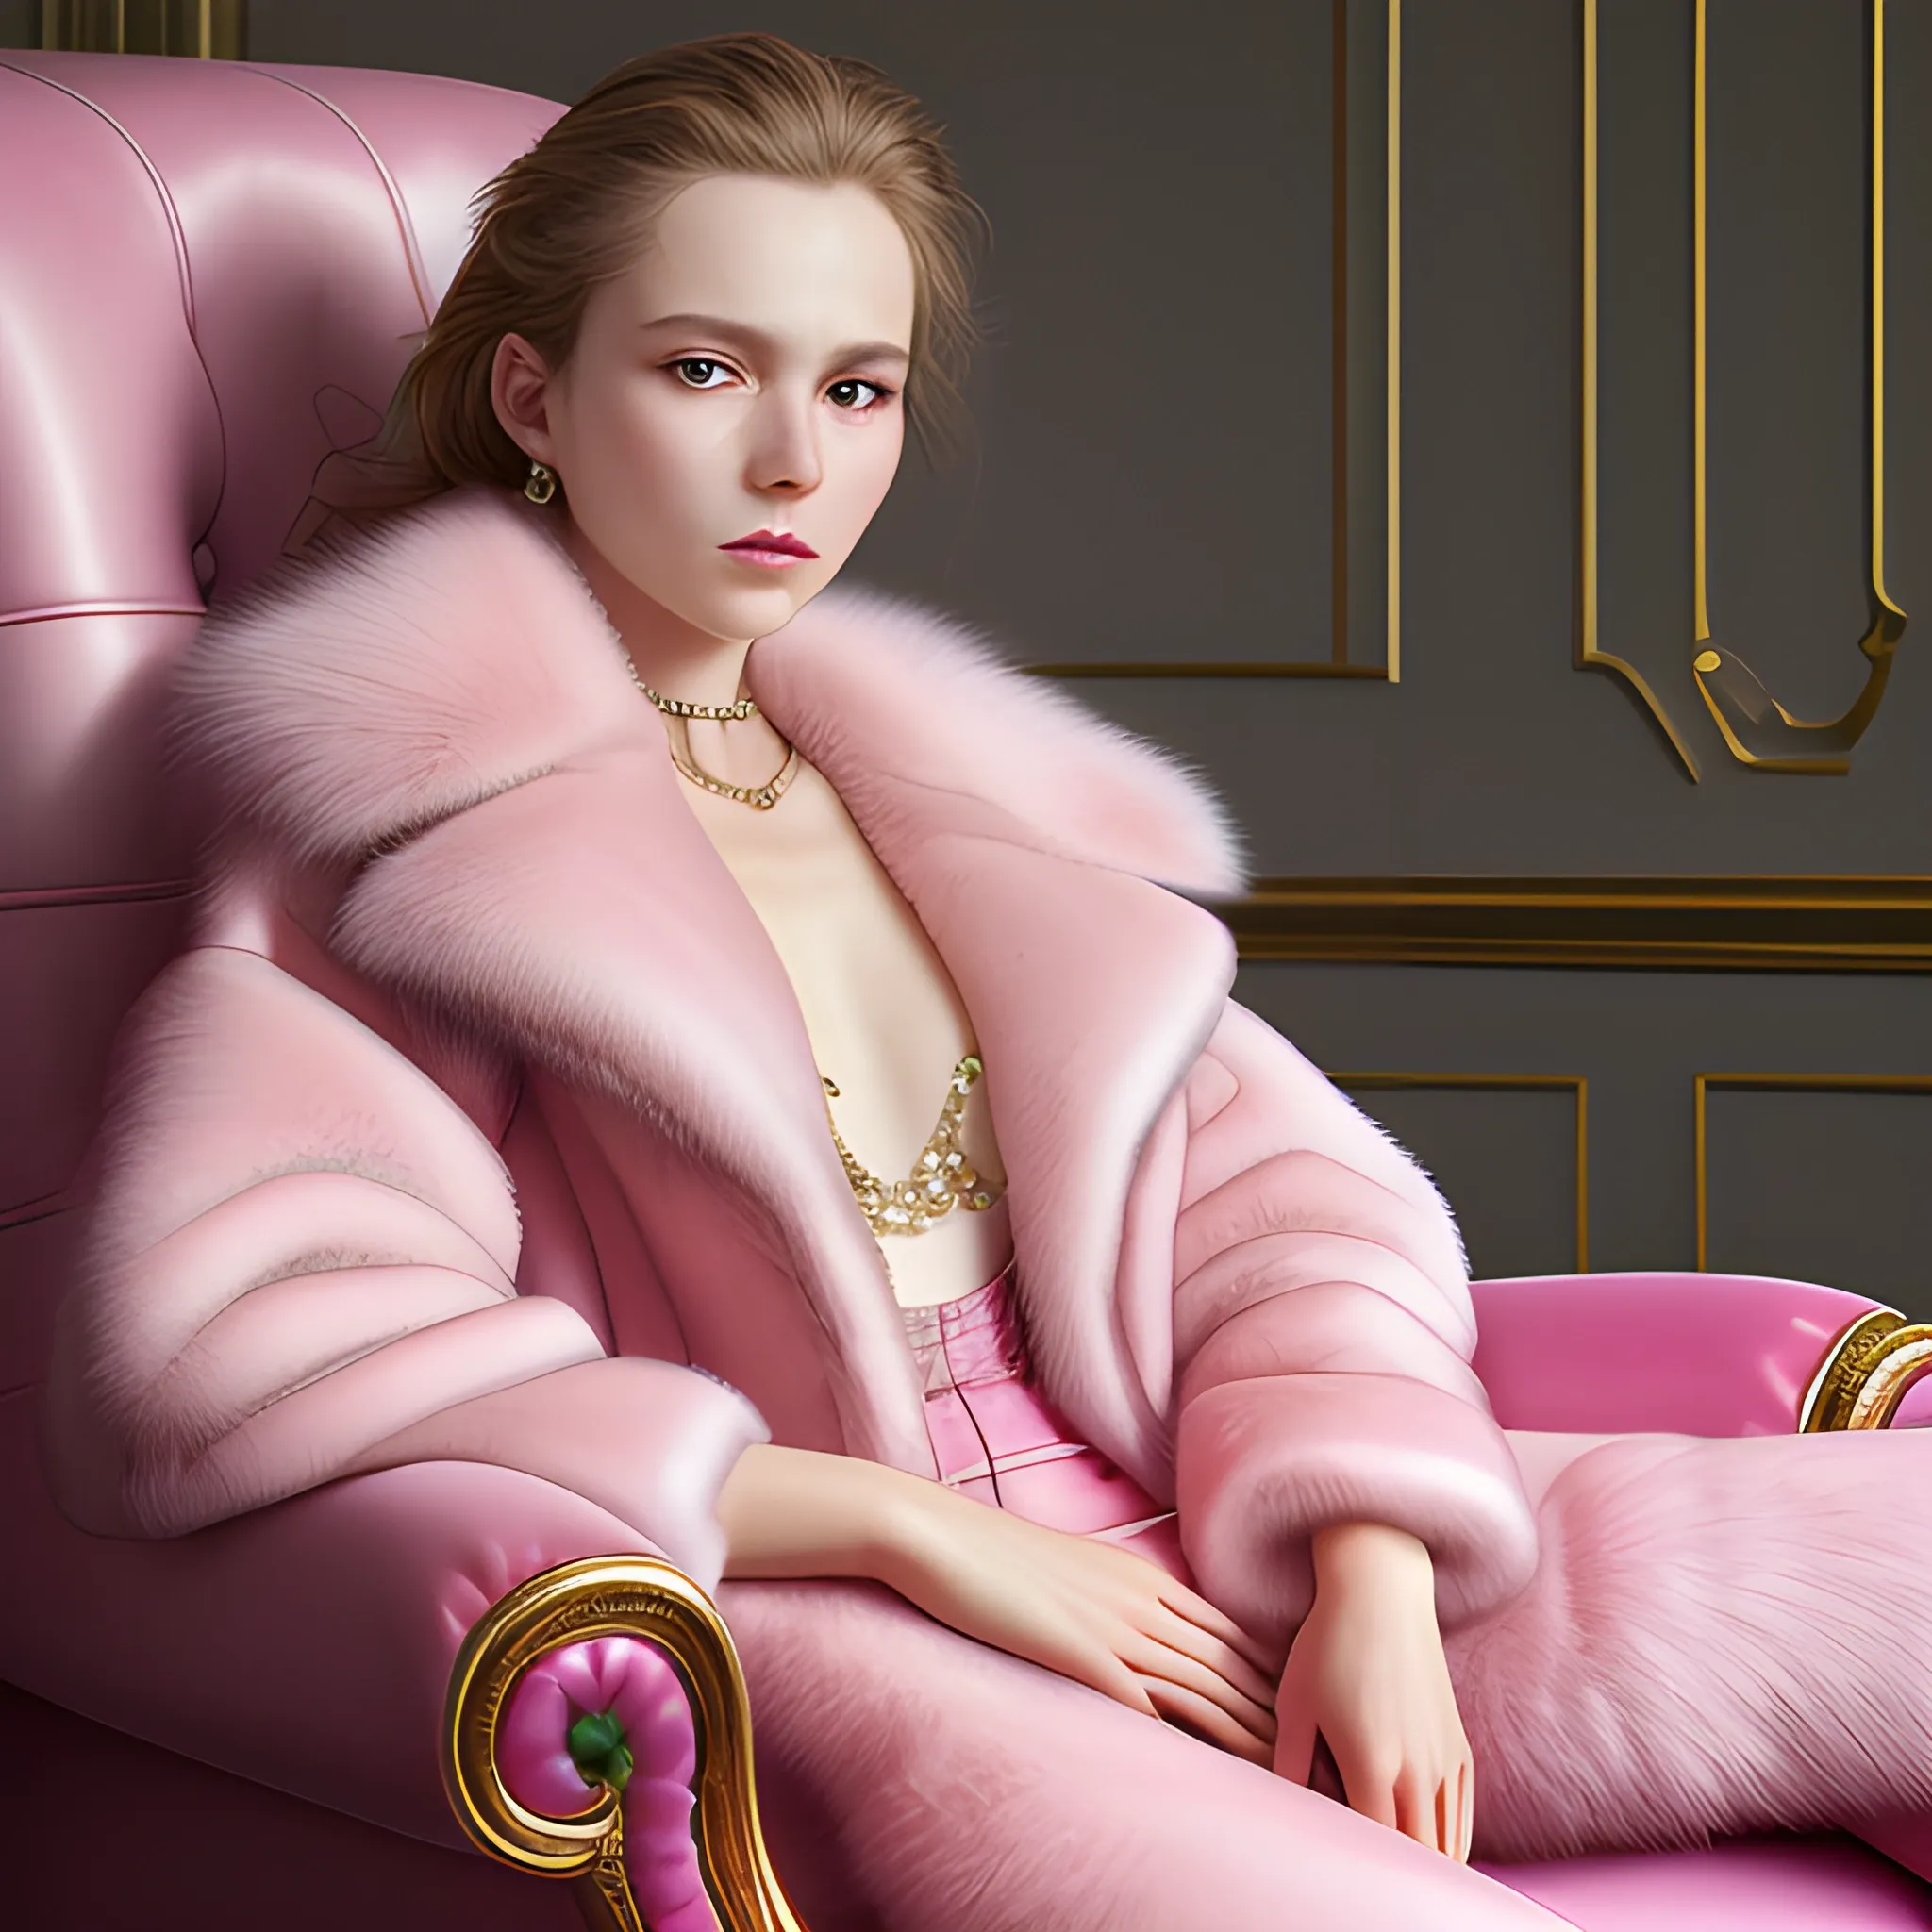 best quality, masterpiece, ultra high res, photorealistic, detailed skin, pink fur coat, sitting on armchair and open legs